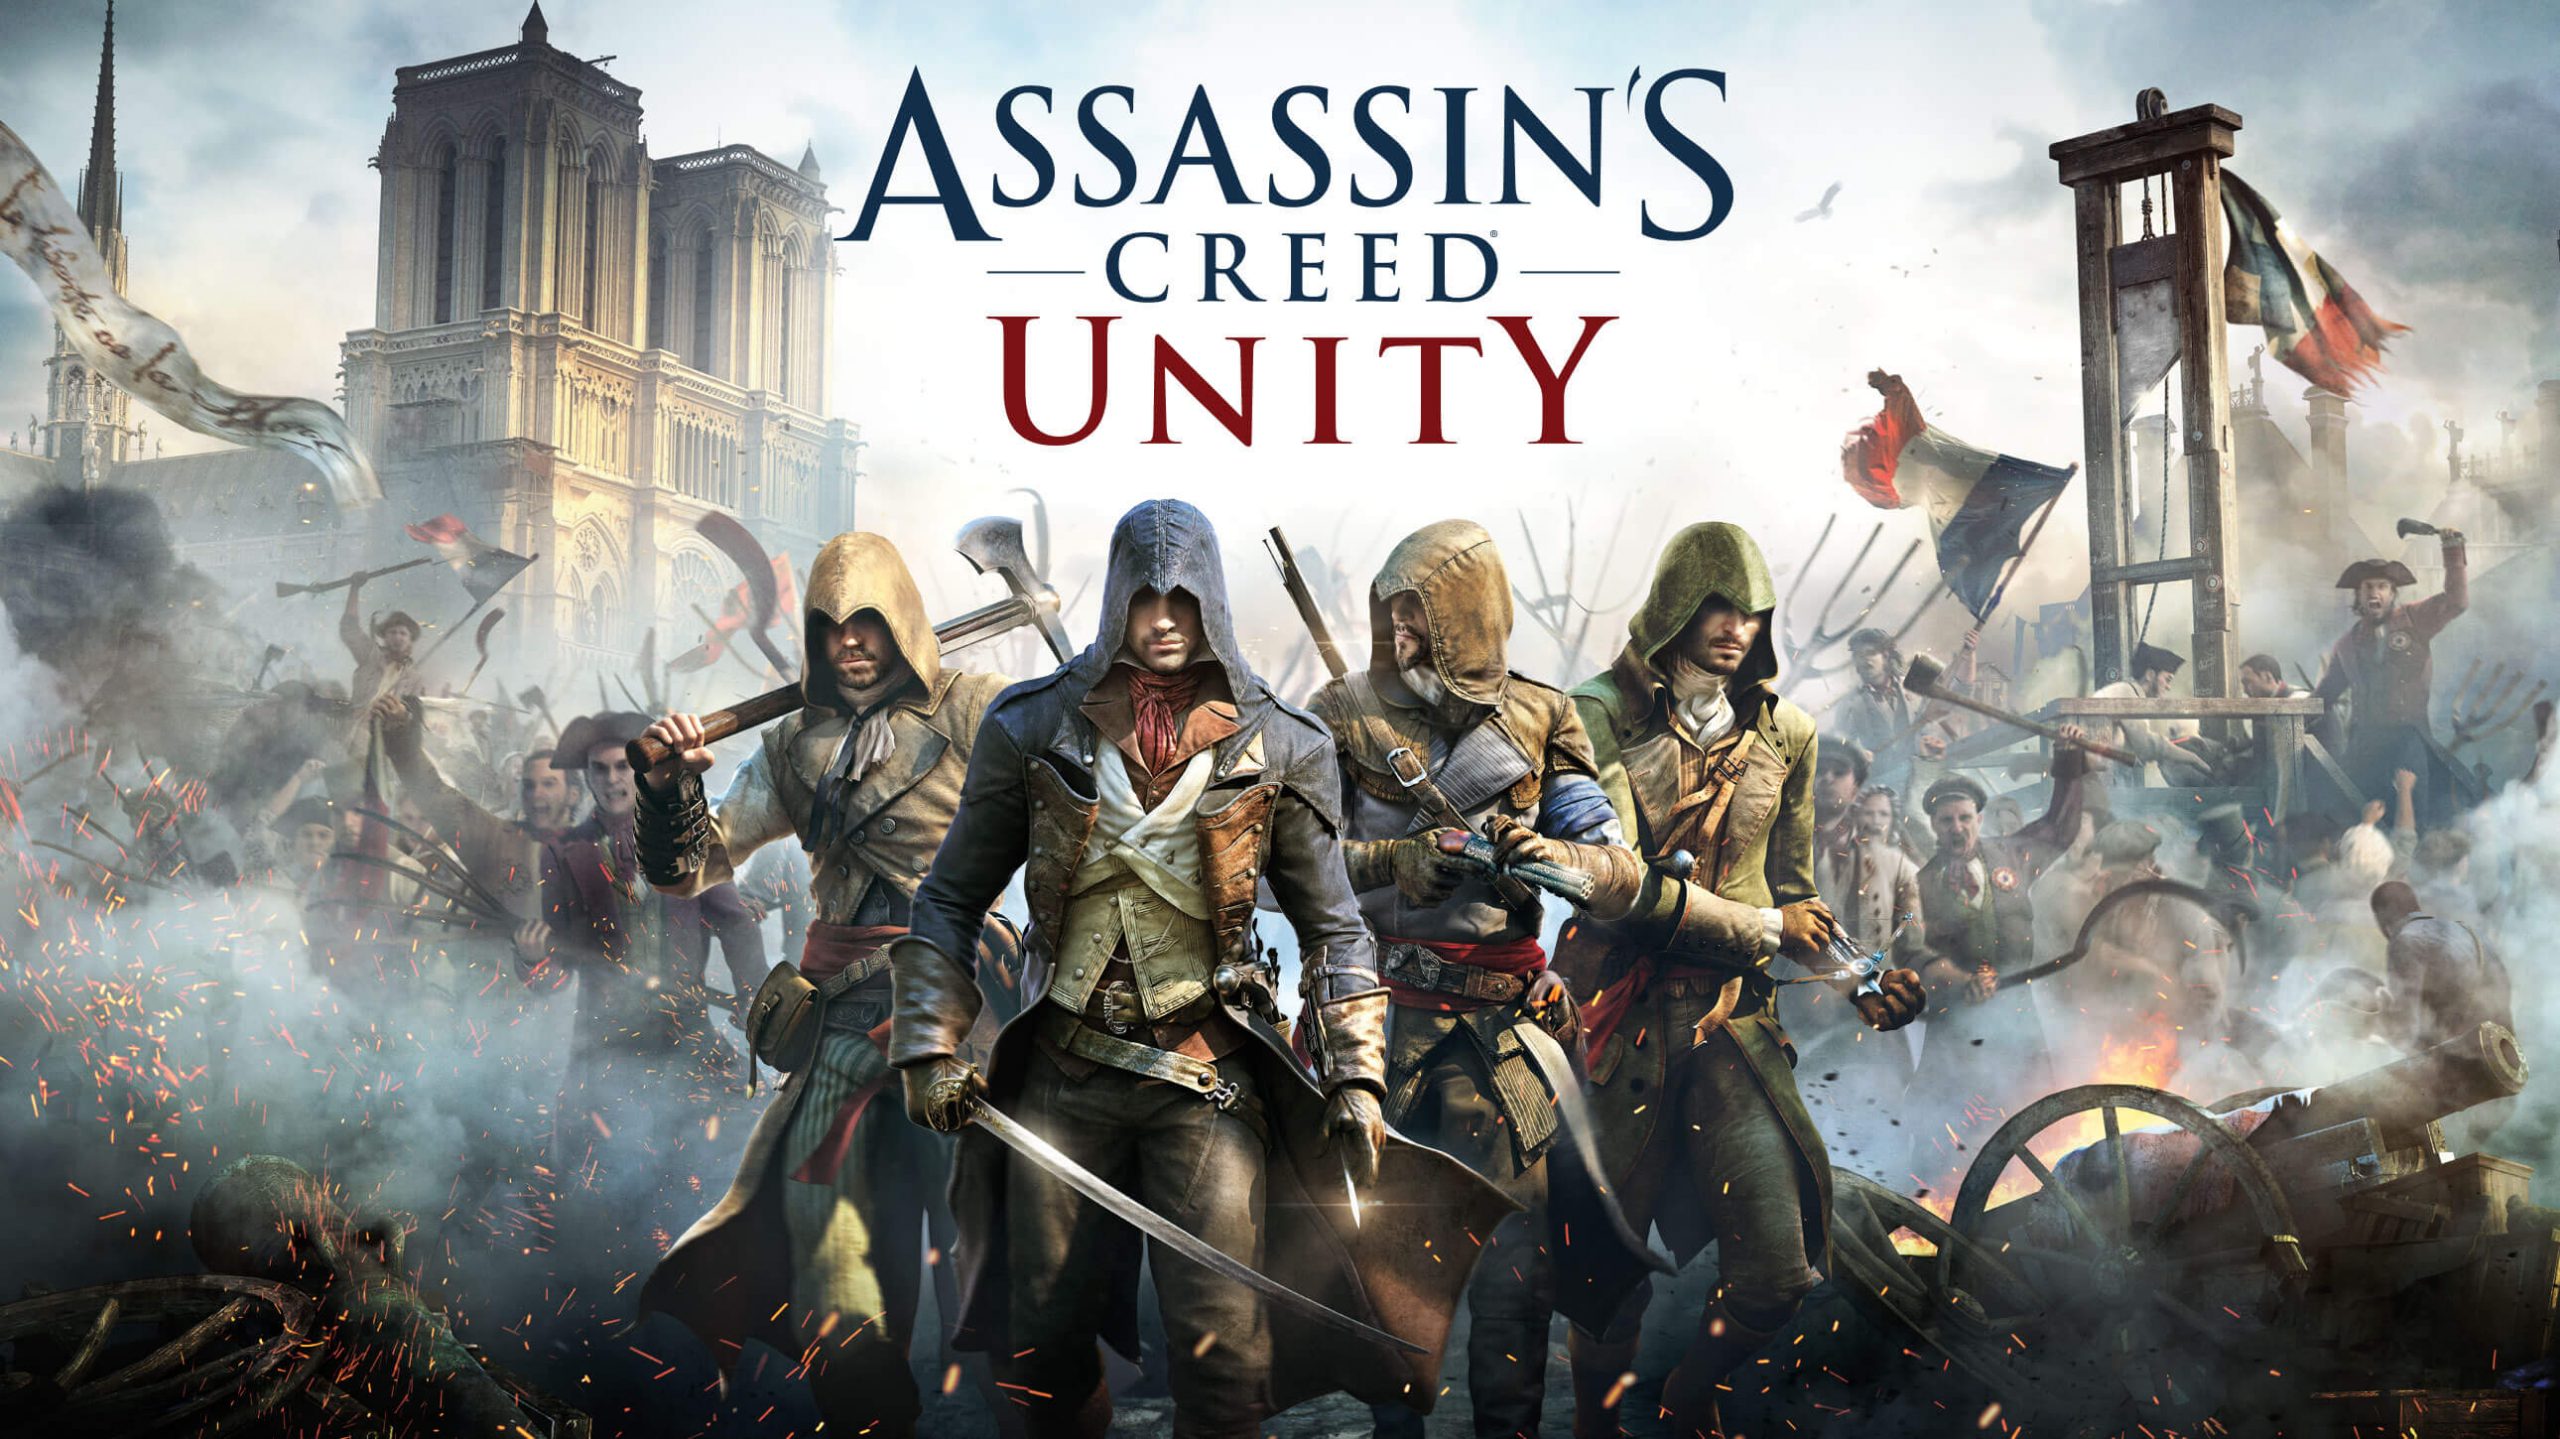 Assassin's Creed Unity Free Download PC Game (Full Version)